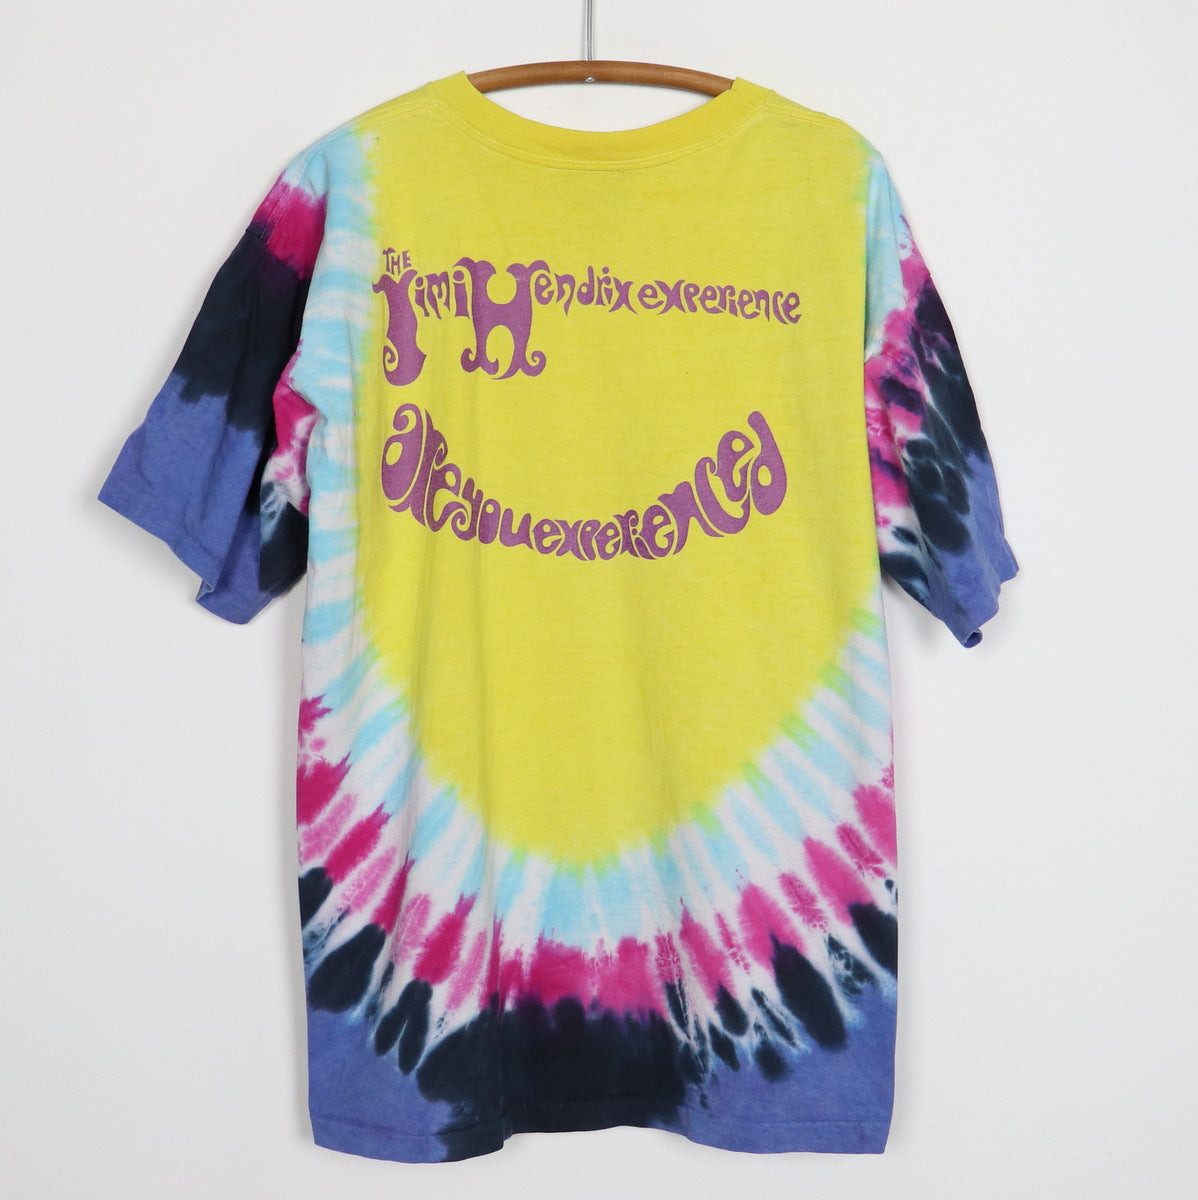 2002 Jimi Hendrix Experience Are You Experienced Tie Dye Shirt